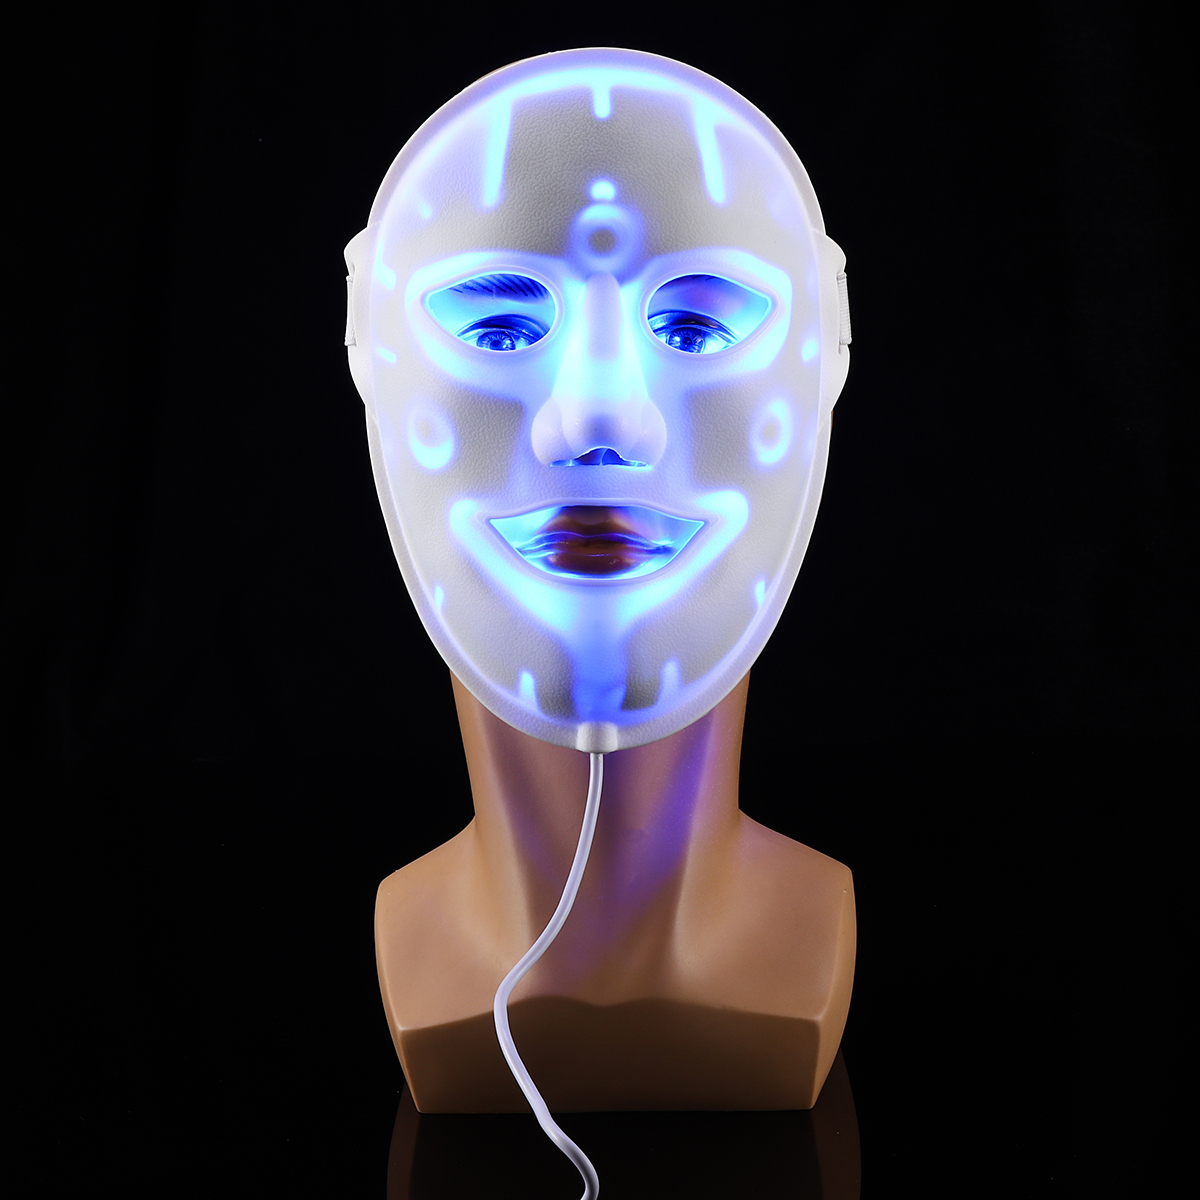 LED-Photon-Therapy-Facial-Mask-3-Colors-Vibration-Skin-Massager-Beauty-Face-Tool-1940393-12